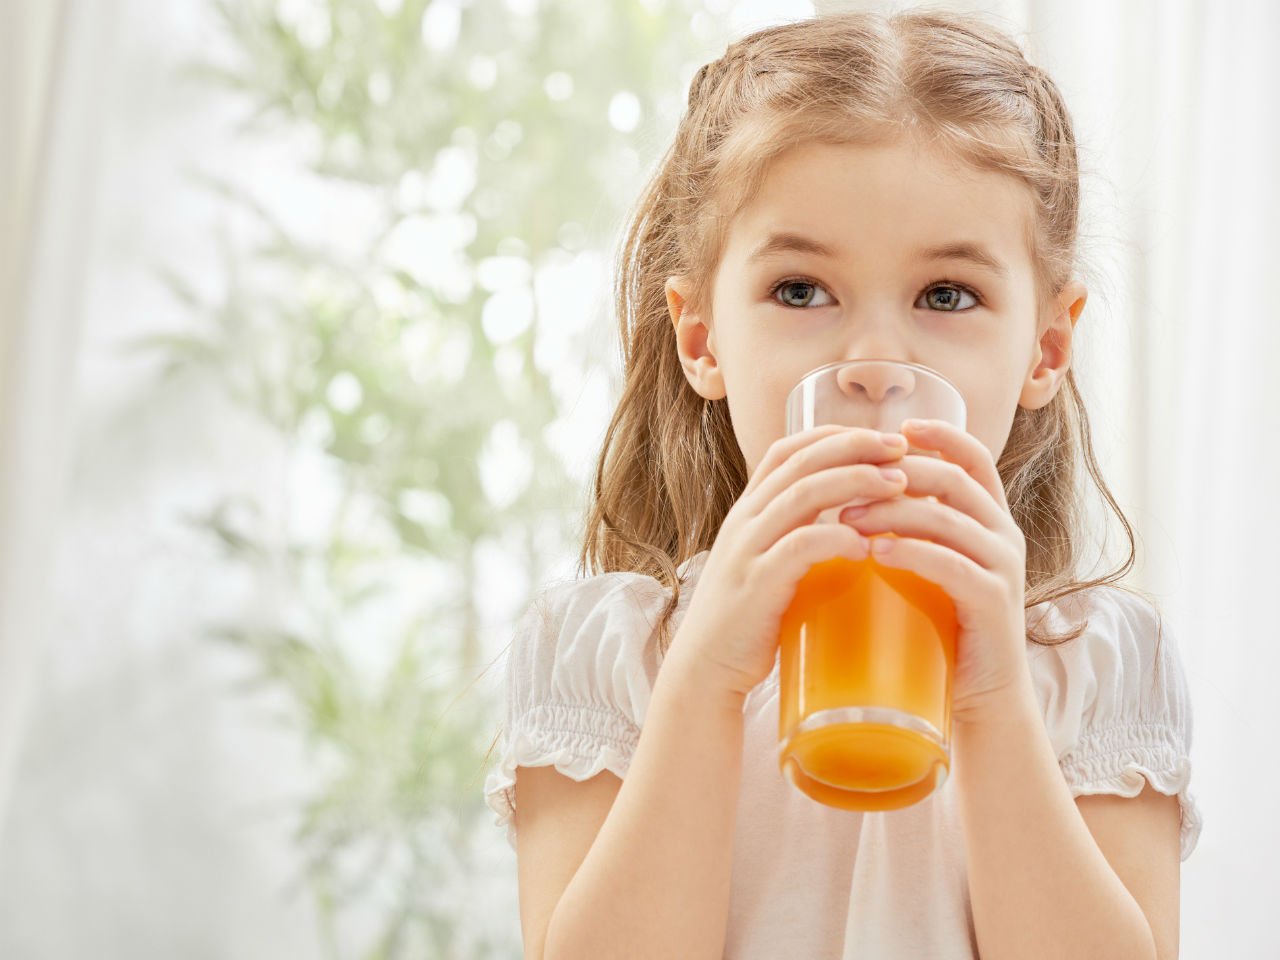 us-fda-takes-steps-to-limit-lead-levels-in-juices